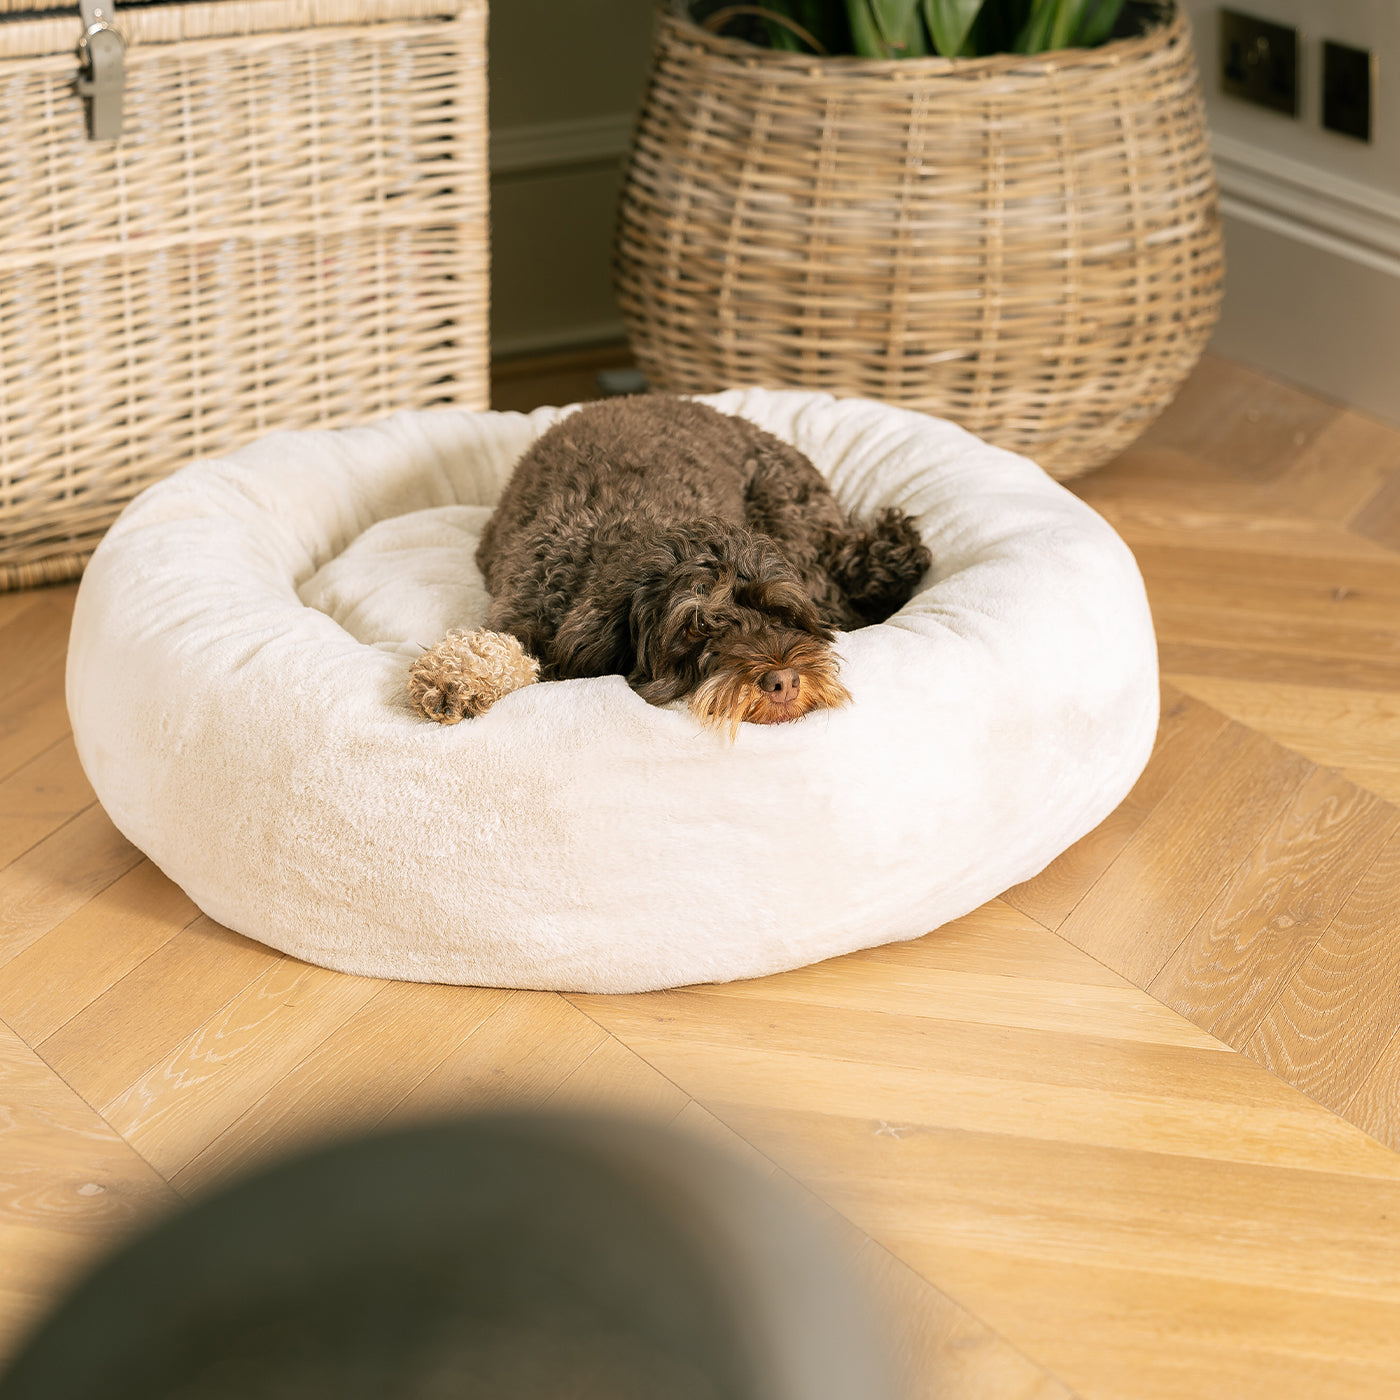 Luxury Donut Anti-Anxiety Dog Bed, In Stunning Cream Faux Fur, Perfect For Your Pets Nap Time! Available Now at Lords & Labradors